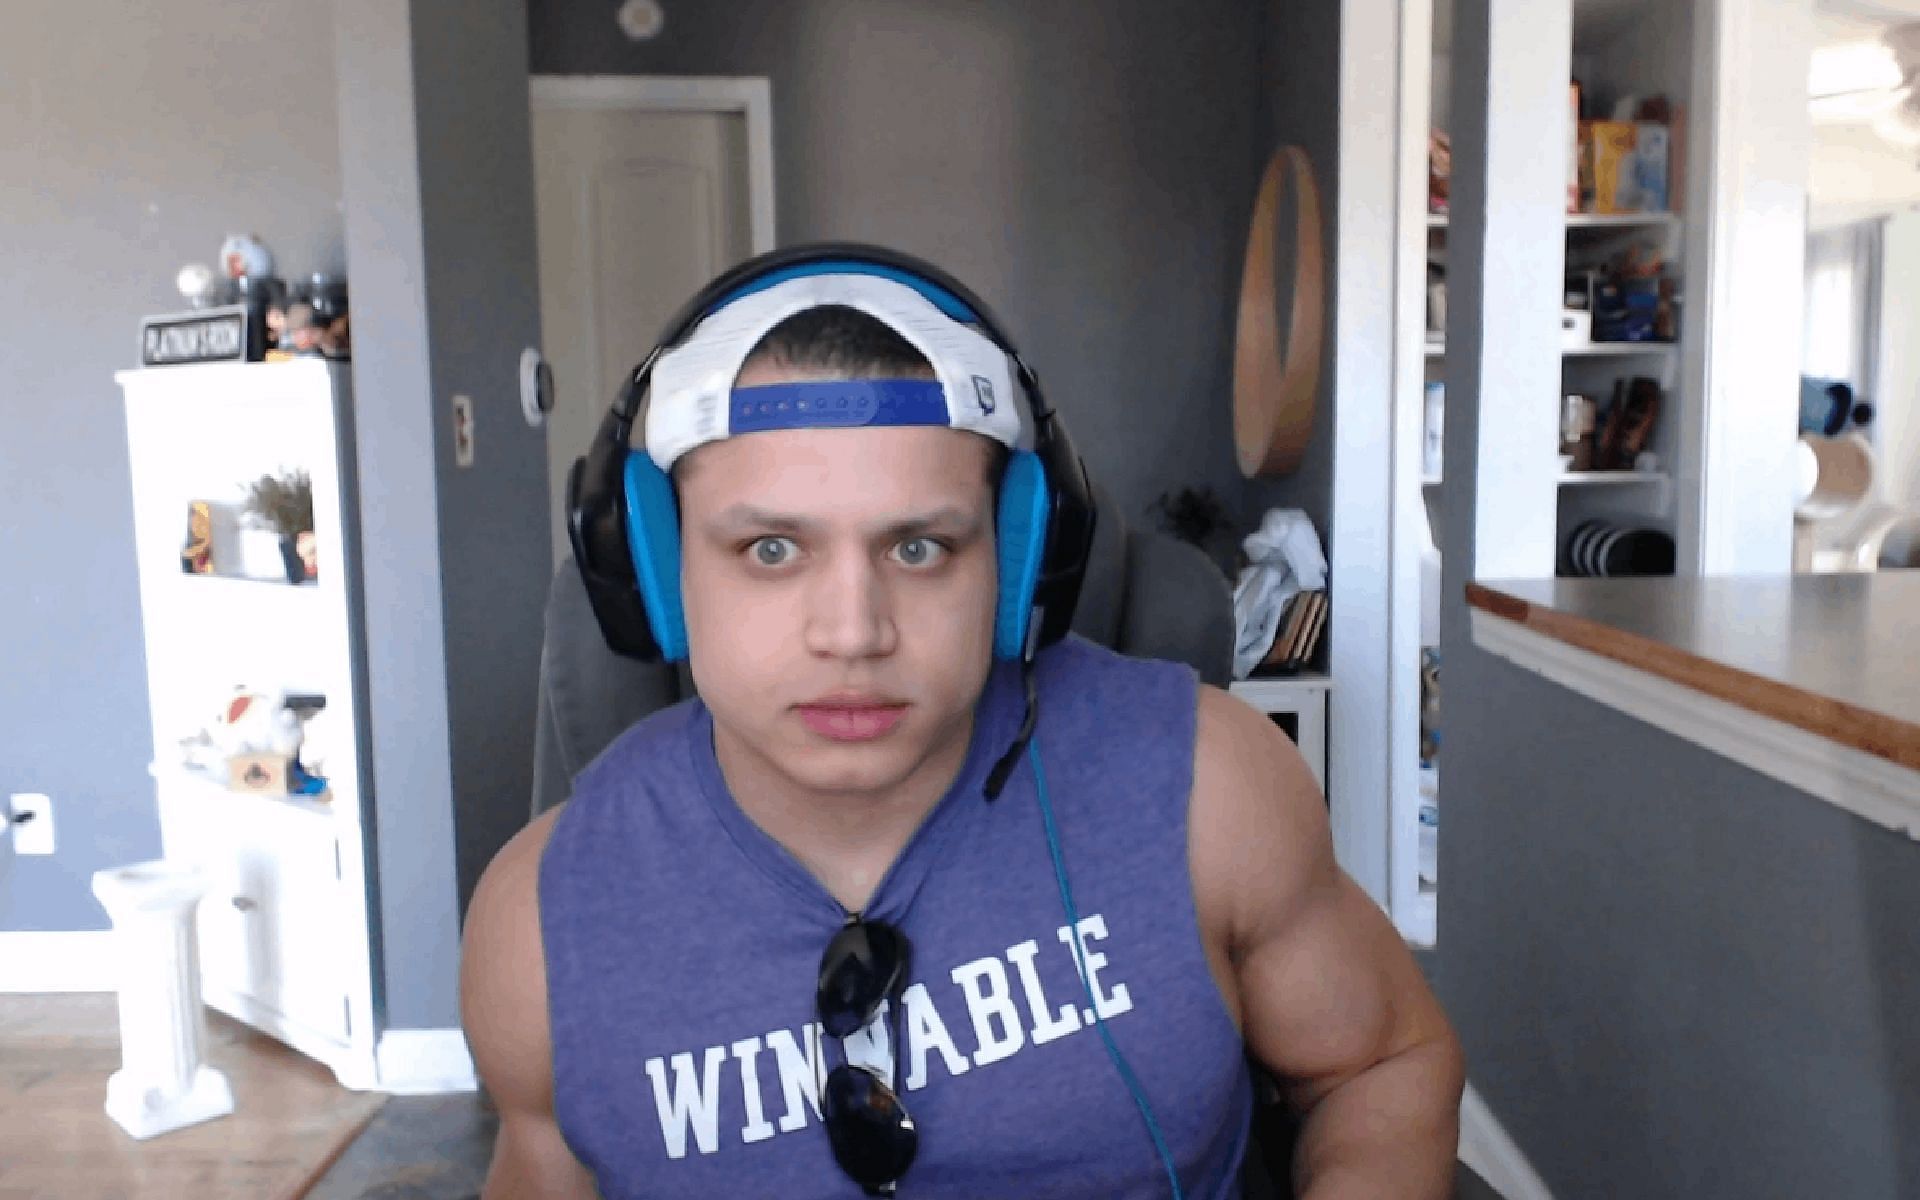 Tyler1 says he wants to choose where his tax money goes (Image via Twitch/loltyler1)